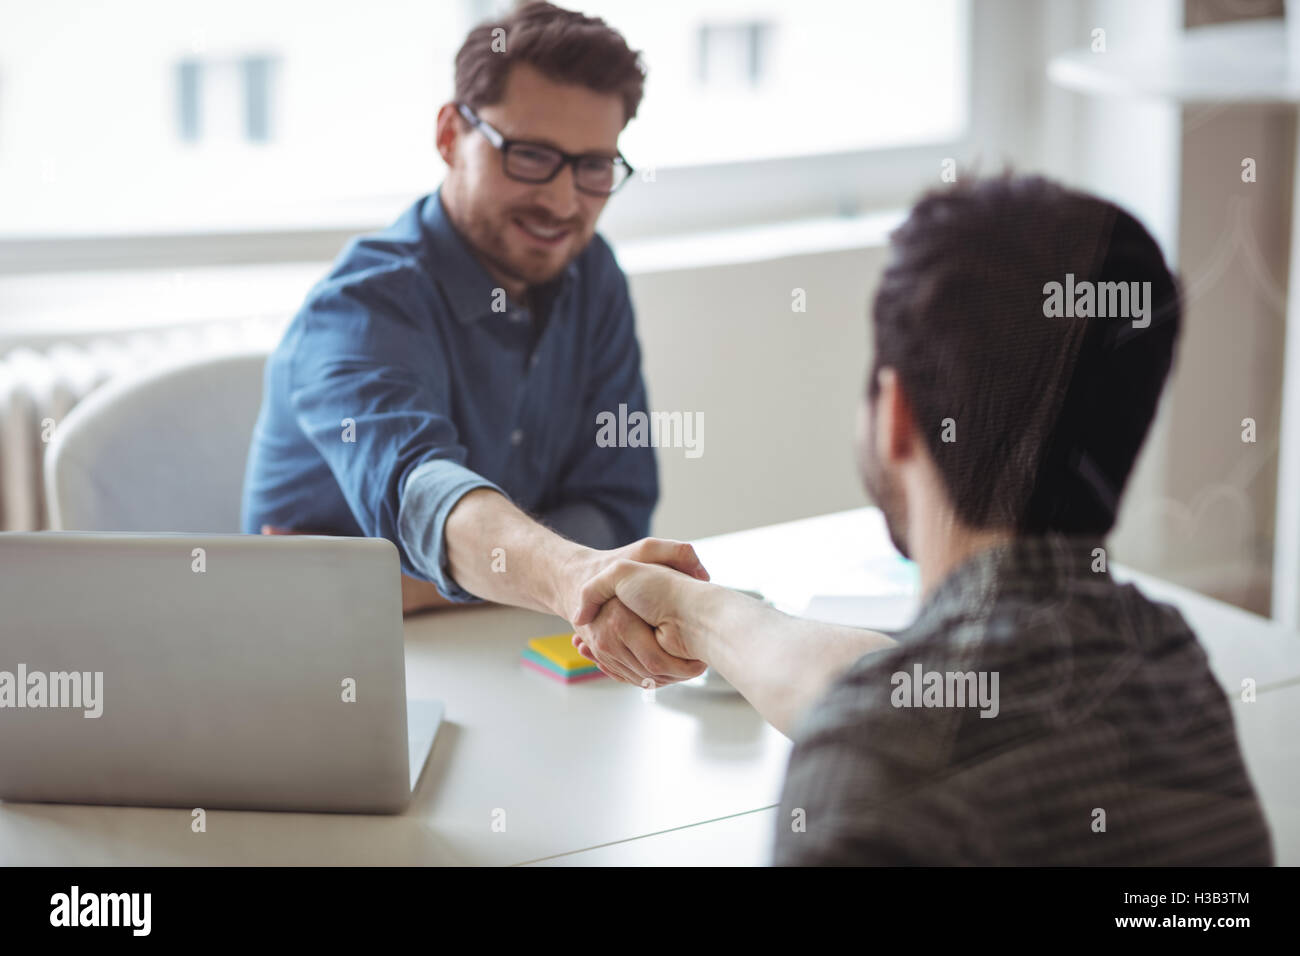 Business people greeting eachother Stock Photo